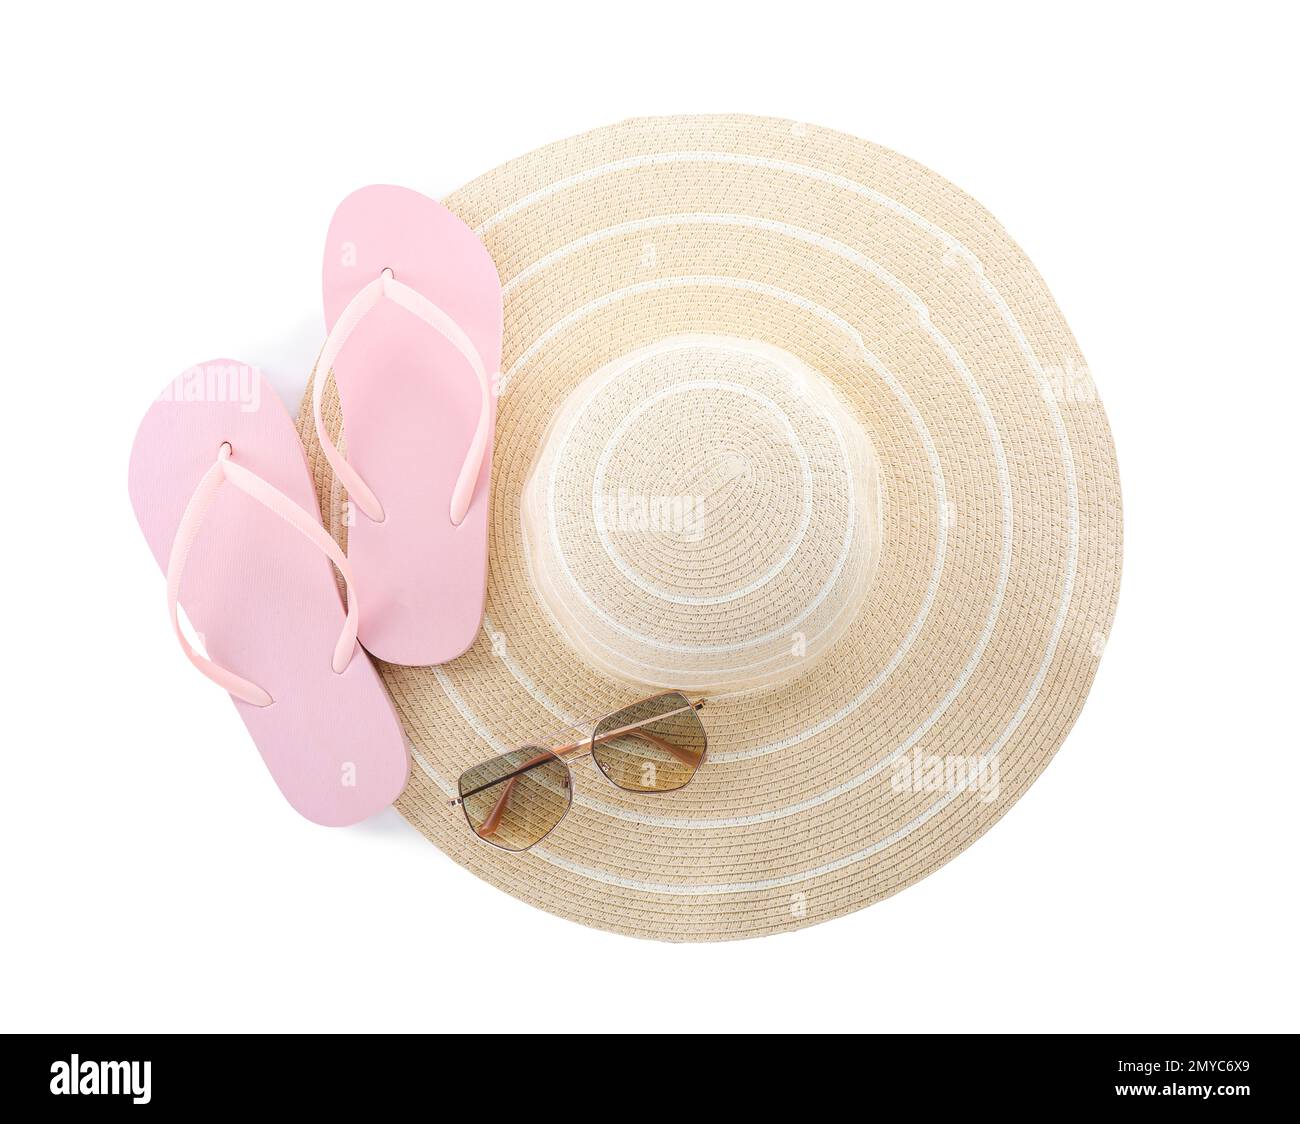 Pink flip flops, hat and sunglasses on white background, top view. Beach objects Stock Photo